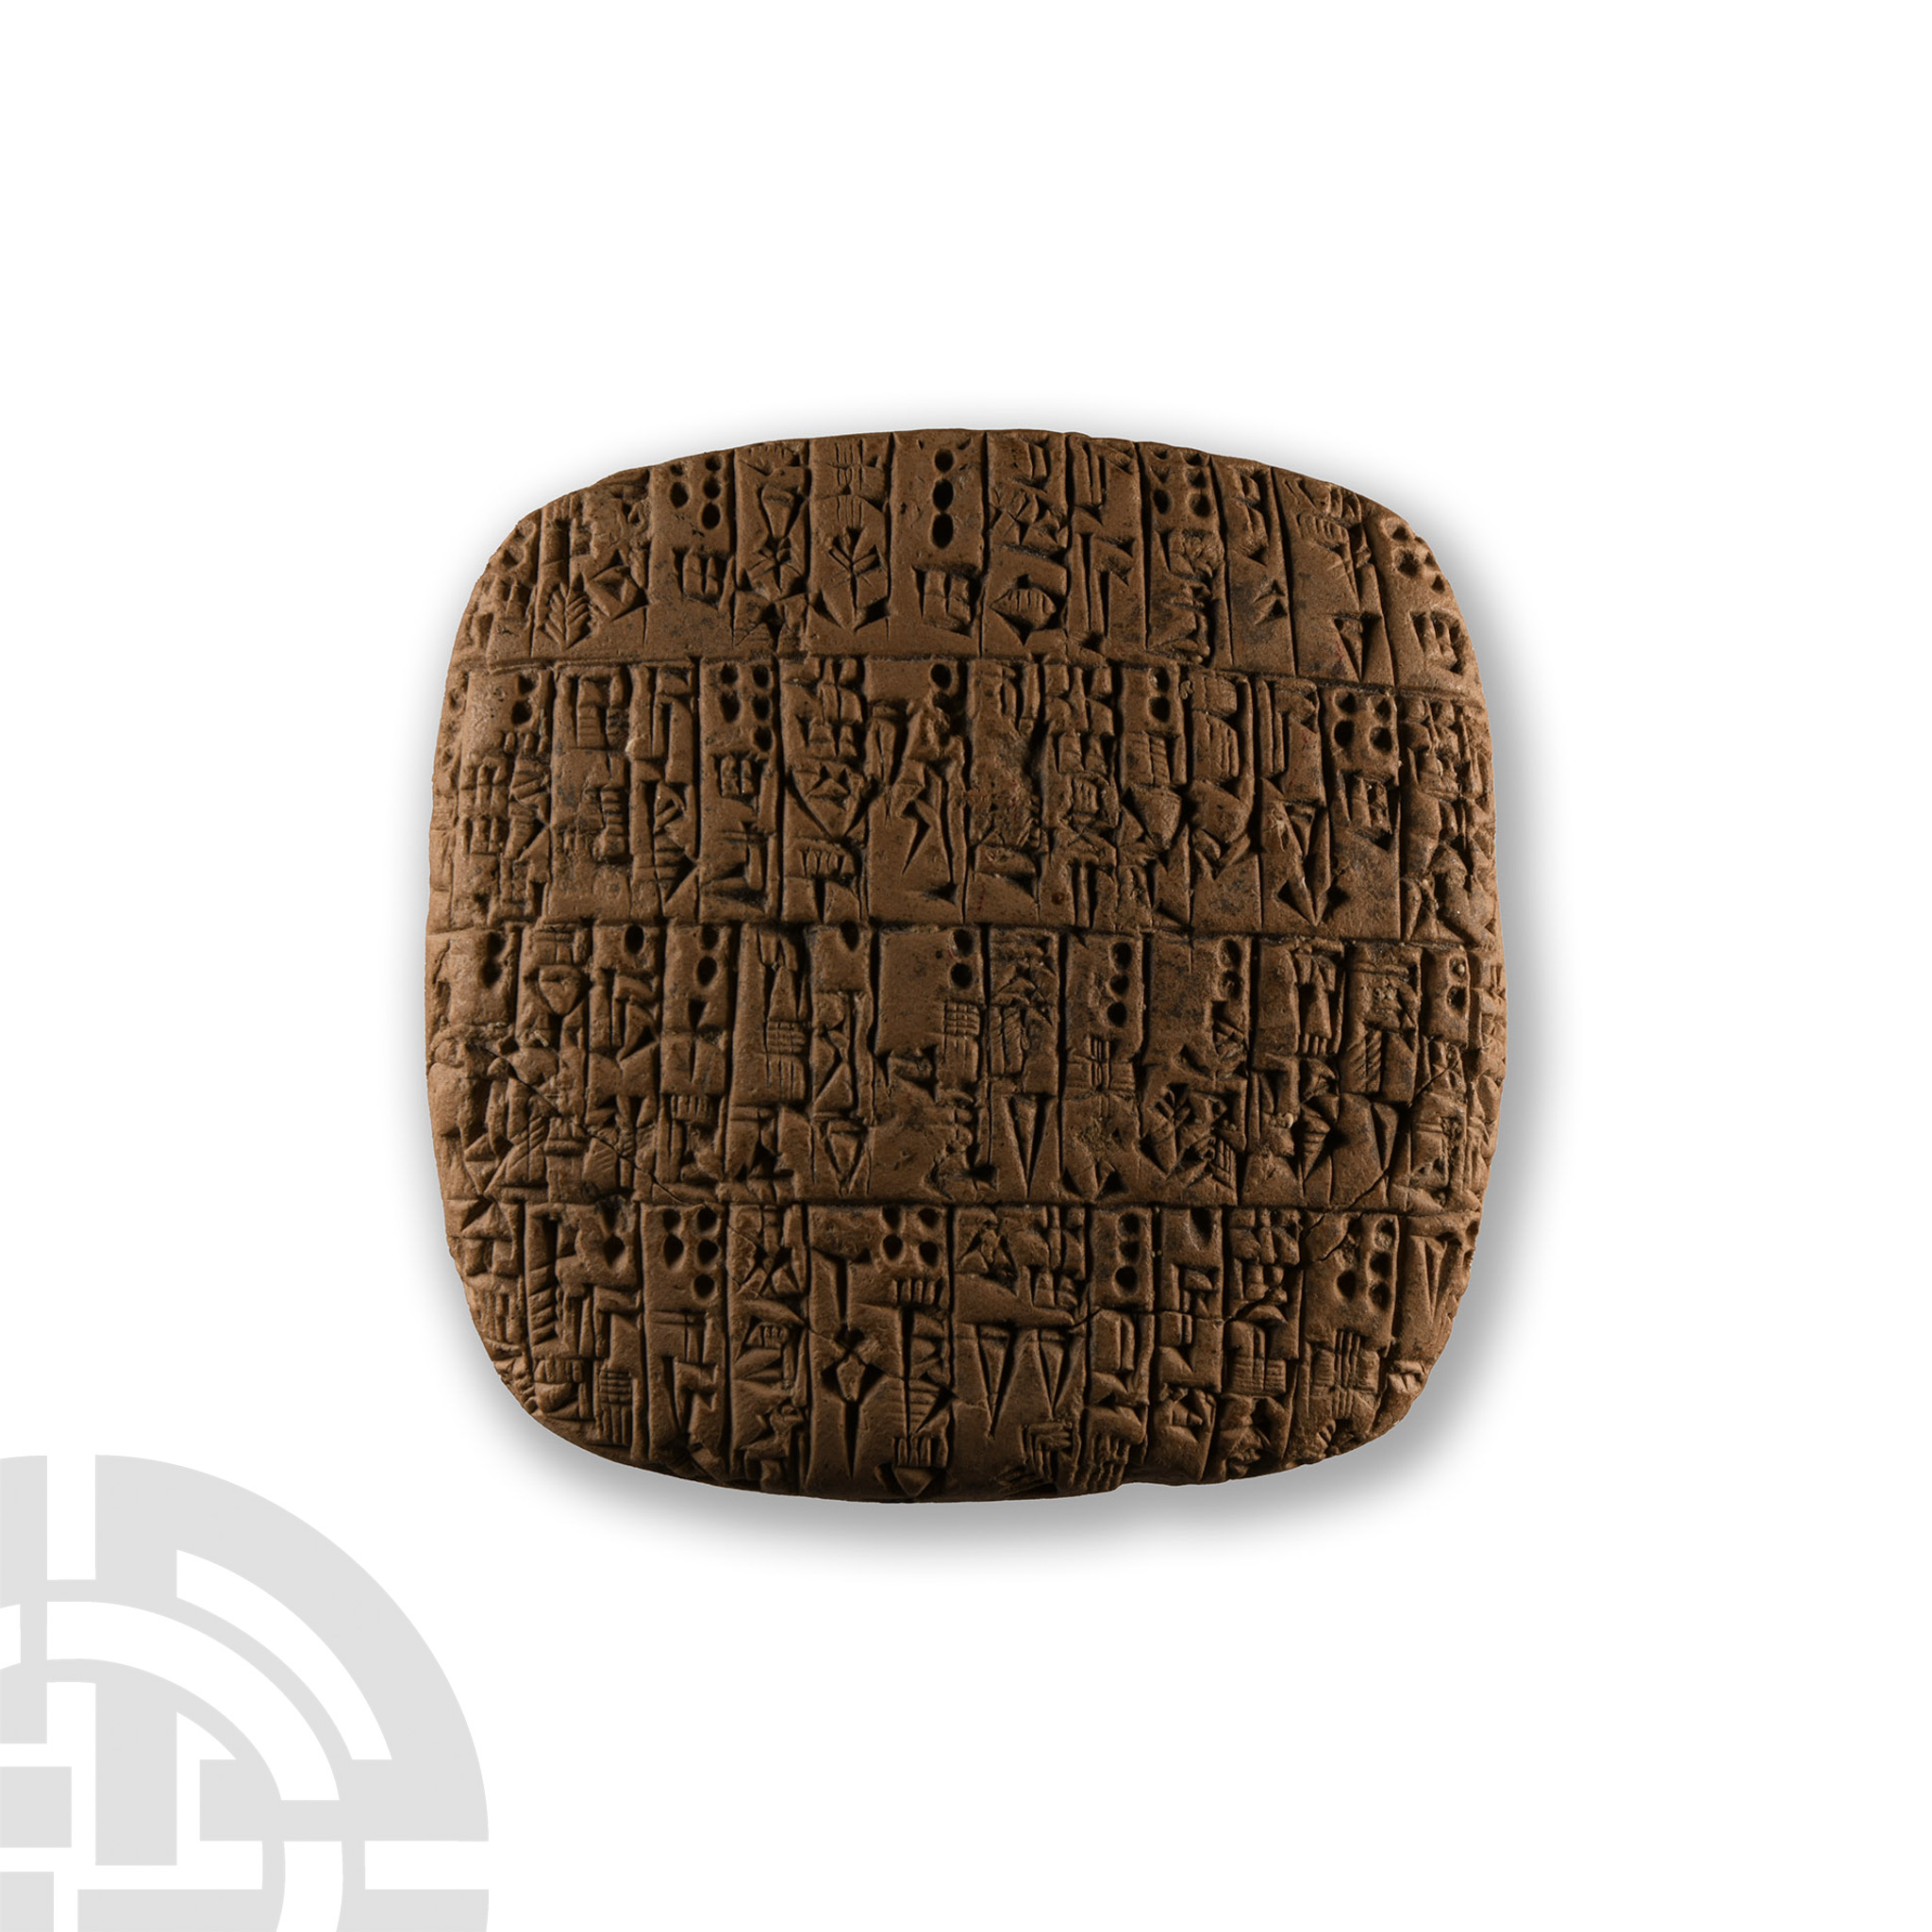 Early Dynastic Terracotta Cuneiform Administrative Tablet Recording Livestock and their Owners - Bild 2 aus 2